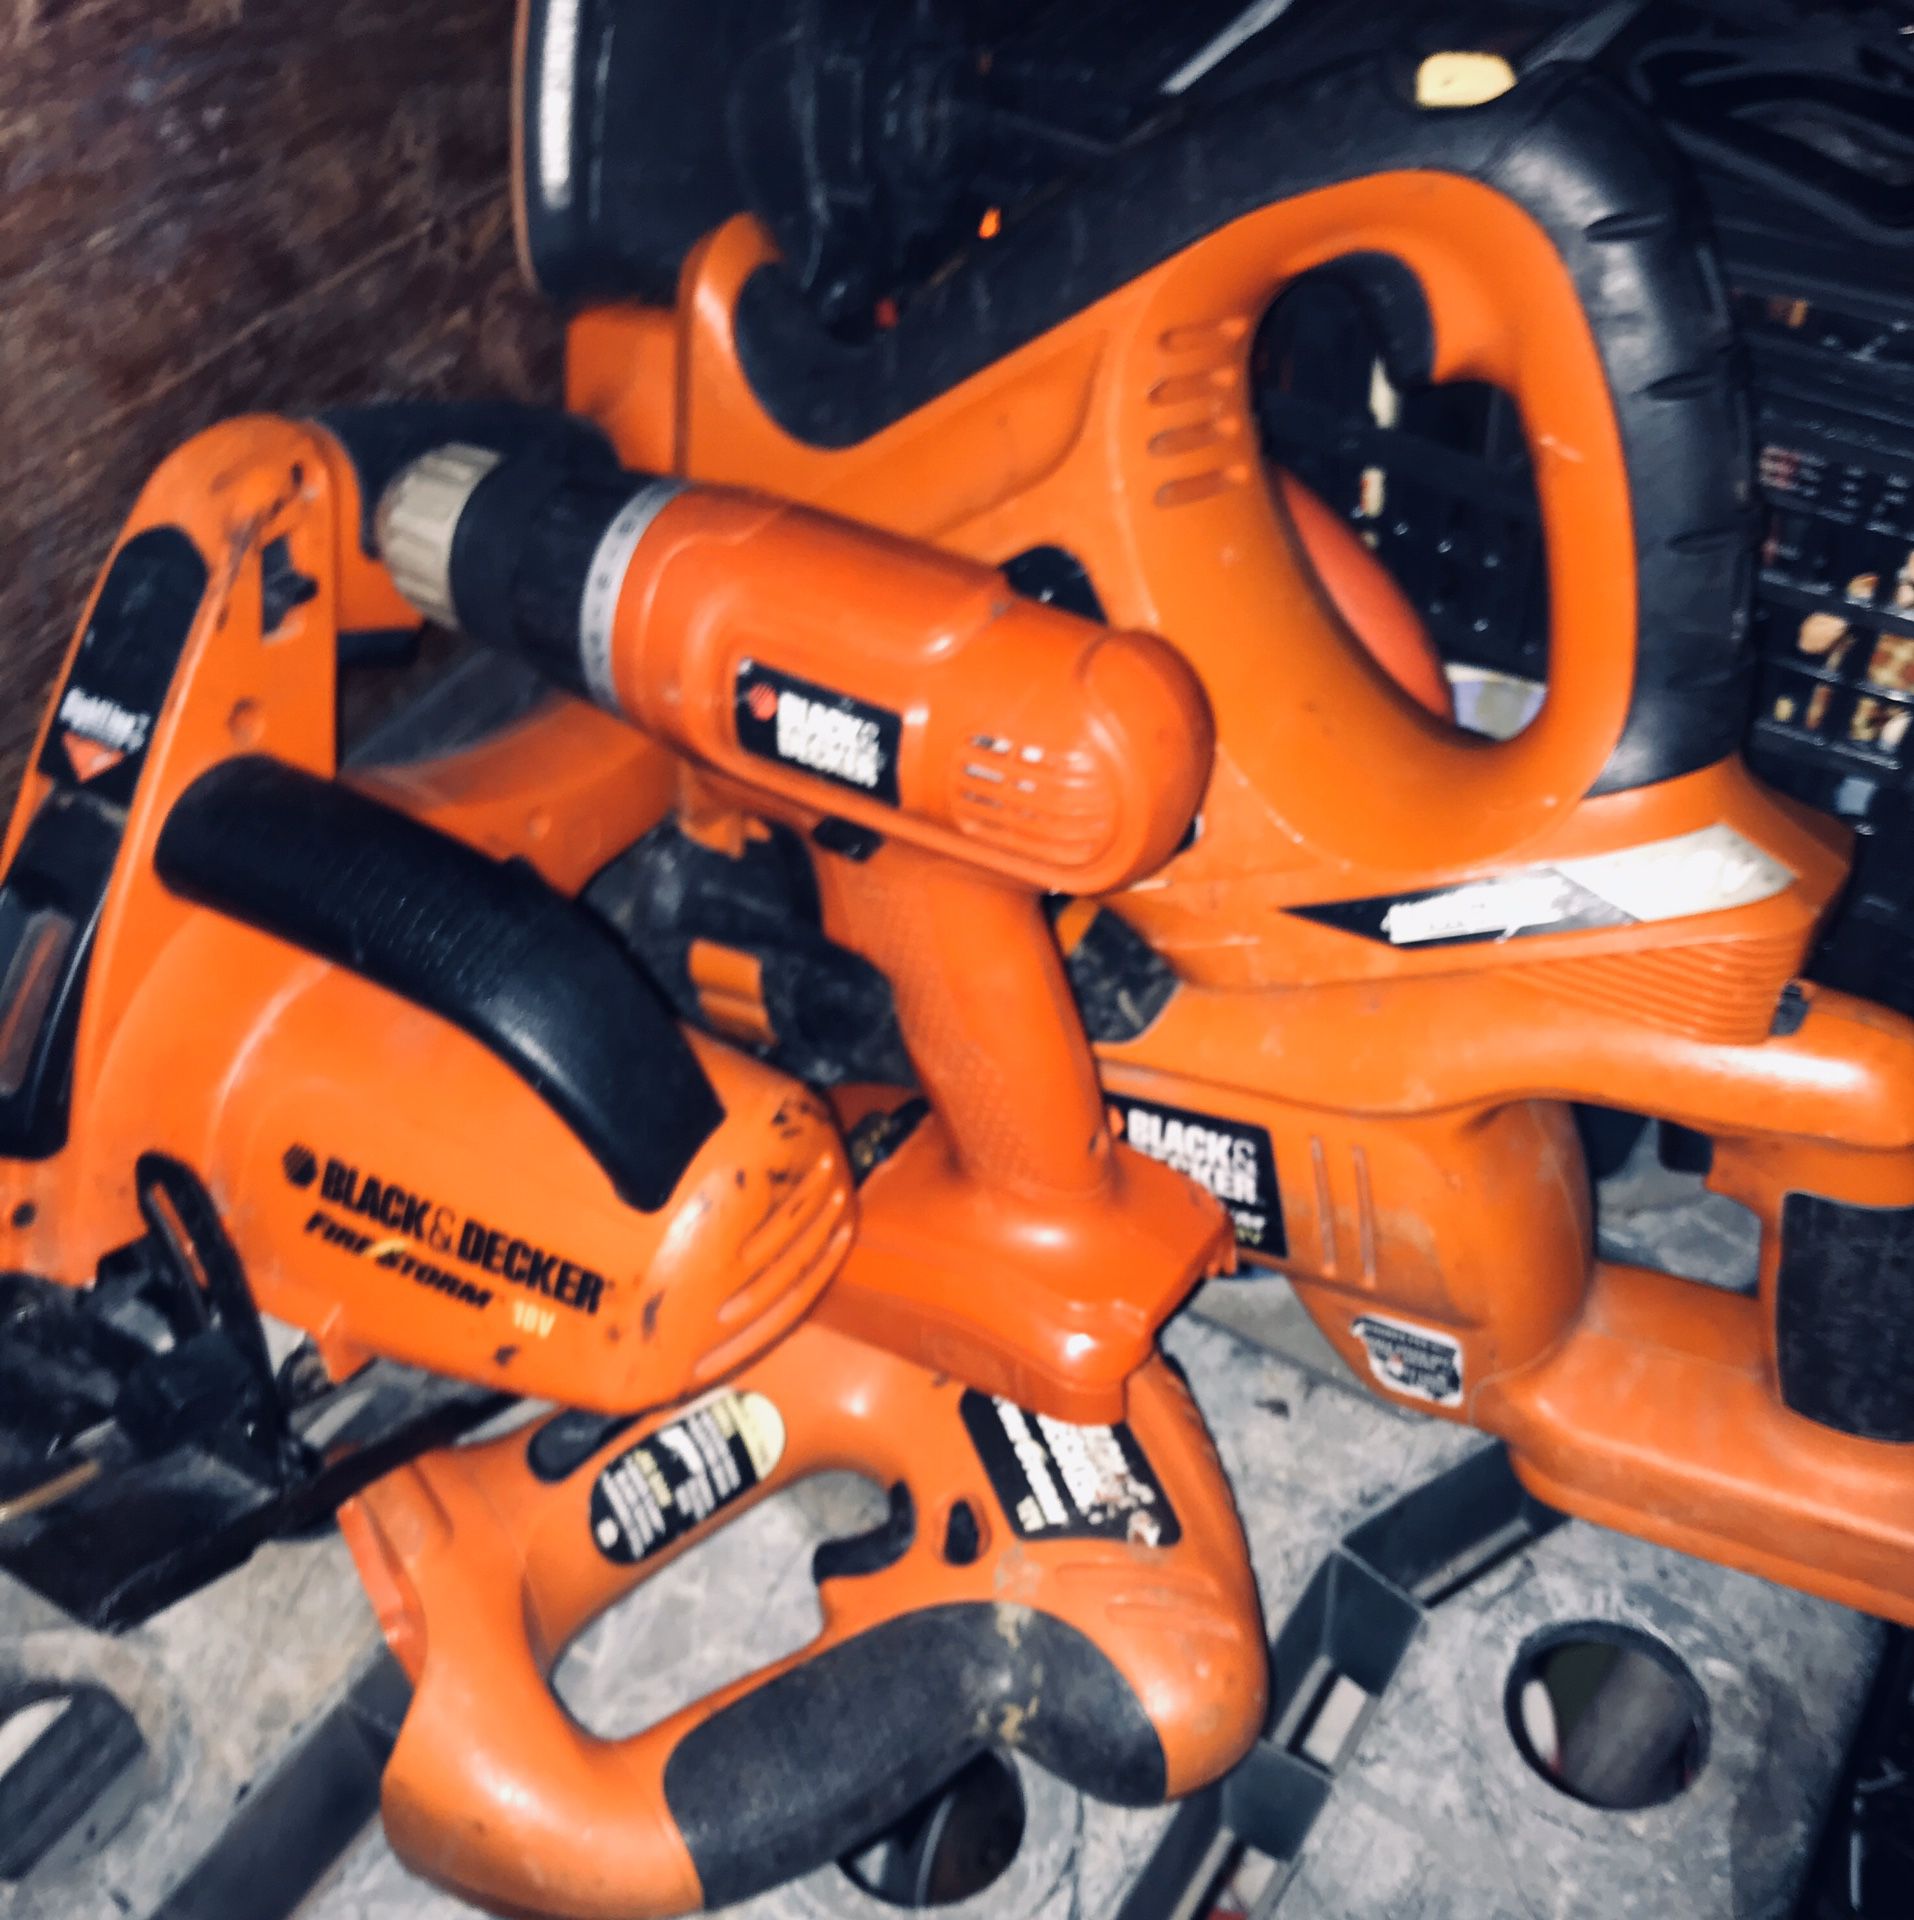 Black&decker bundle: corded and cordless tools